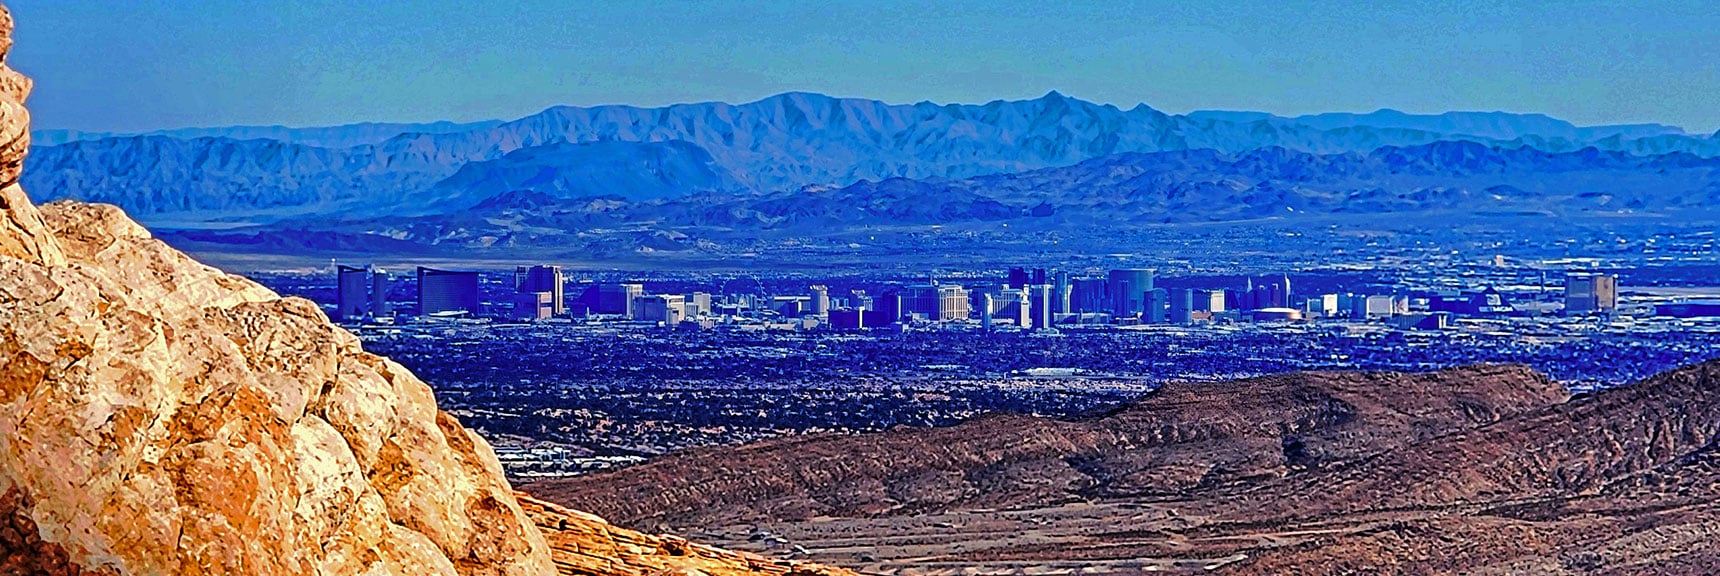 Las Vegas Valley and Strip Visible from Here. | Upper Calico Hills Loop | Calico Basin and Red Rock Canyon, Nevada